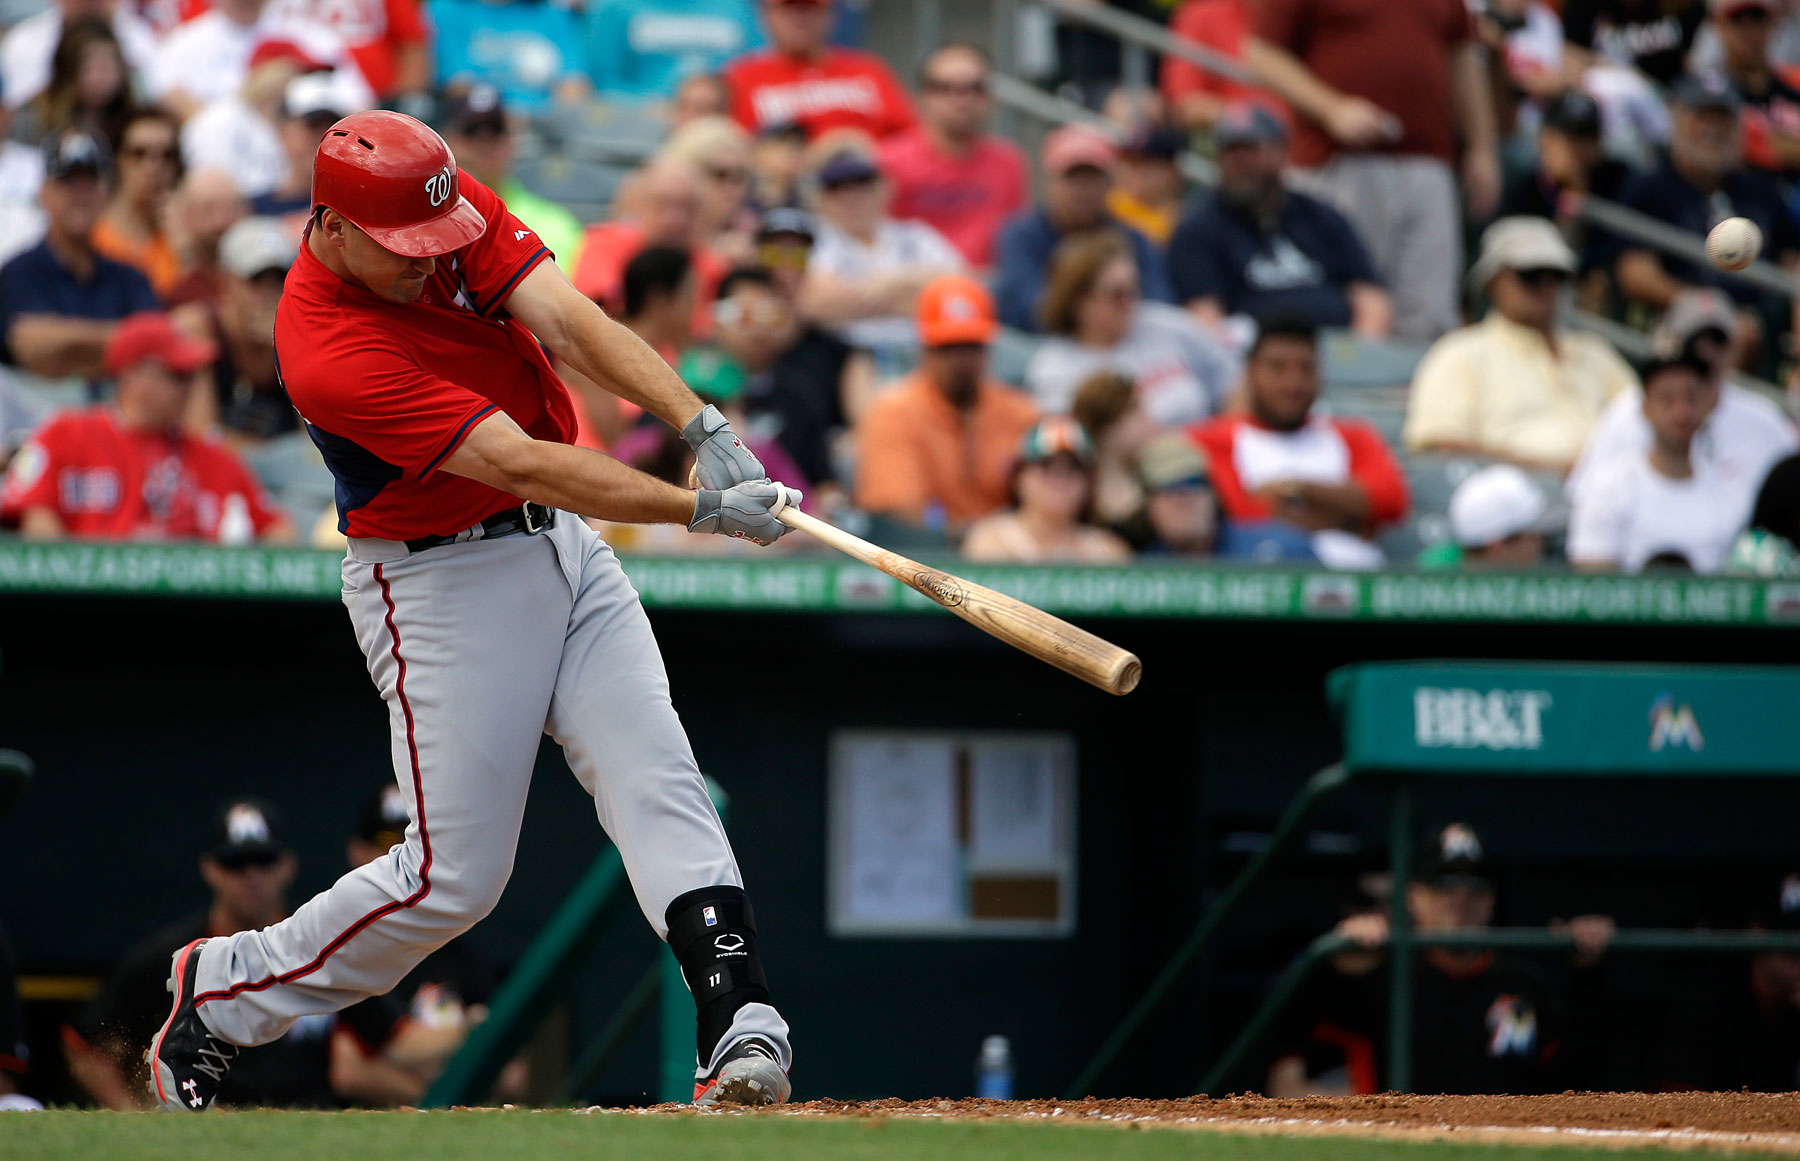 Nats spring training blog: Tough roster moves